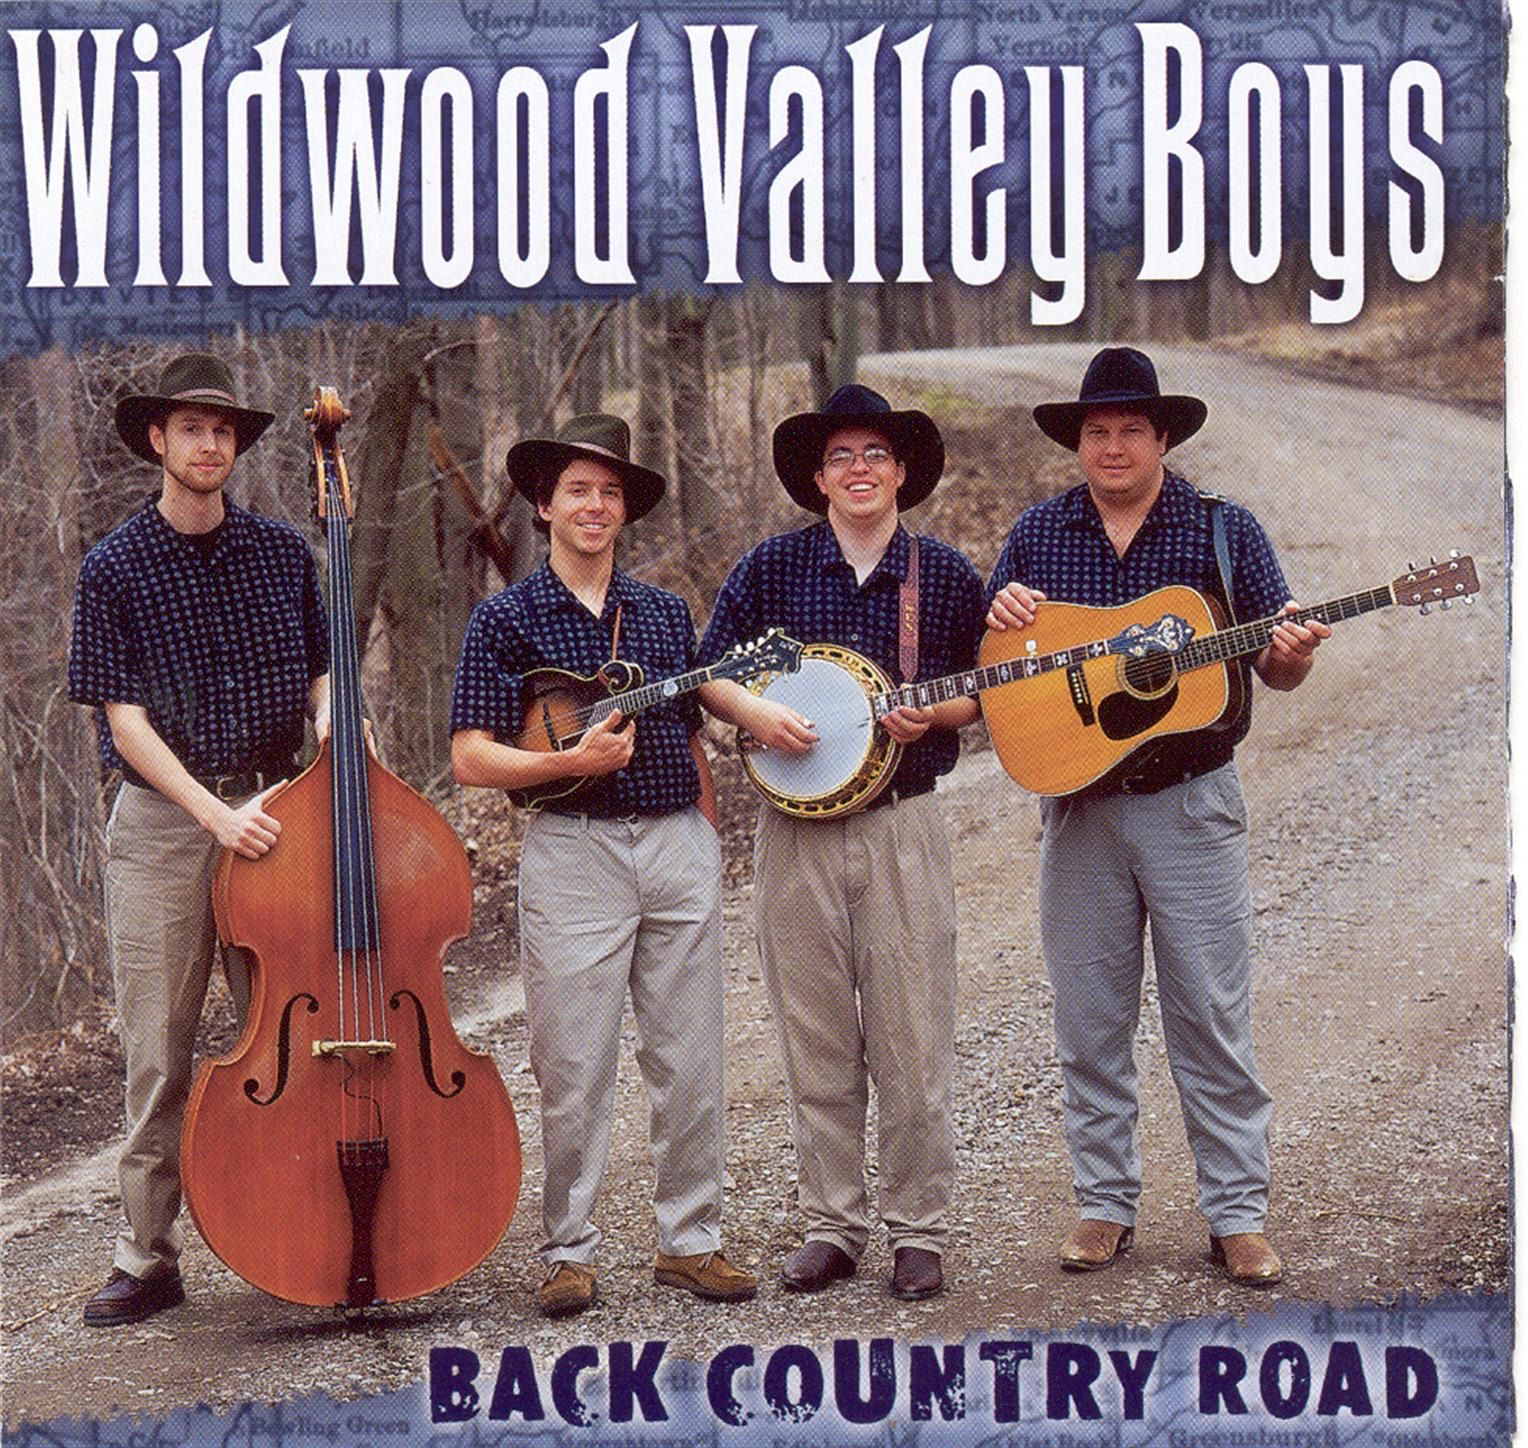 Wildwood Valley Boys - Back Country Road cover album